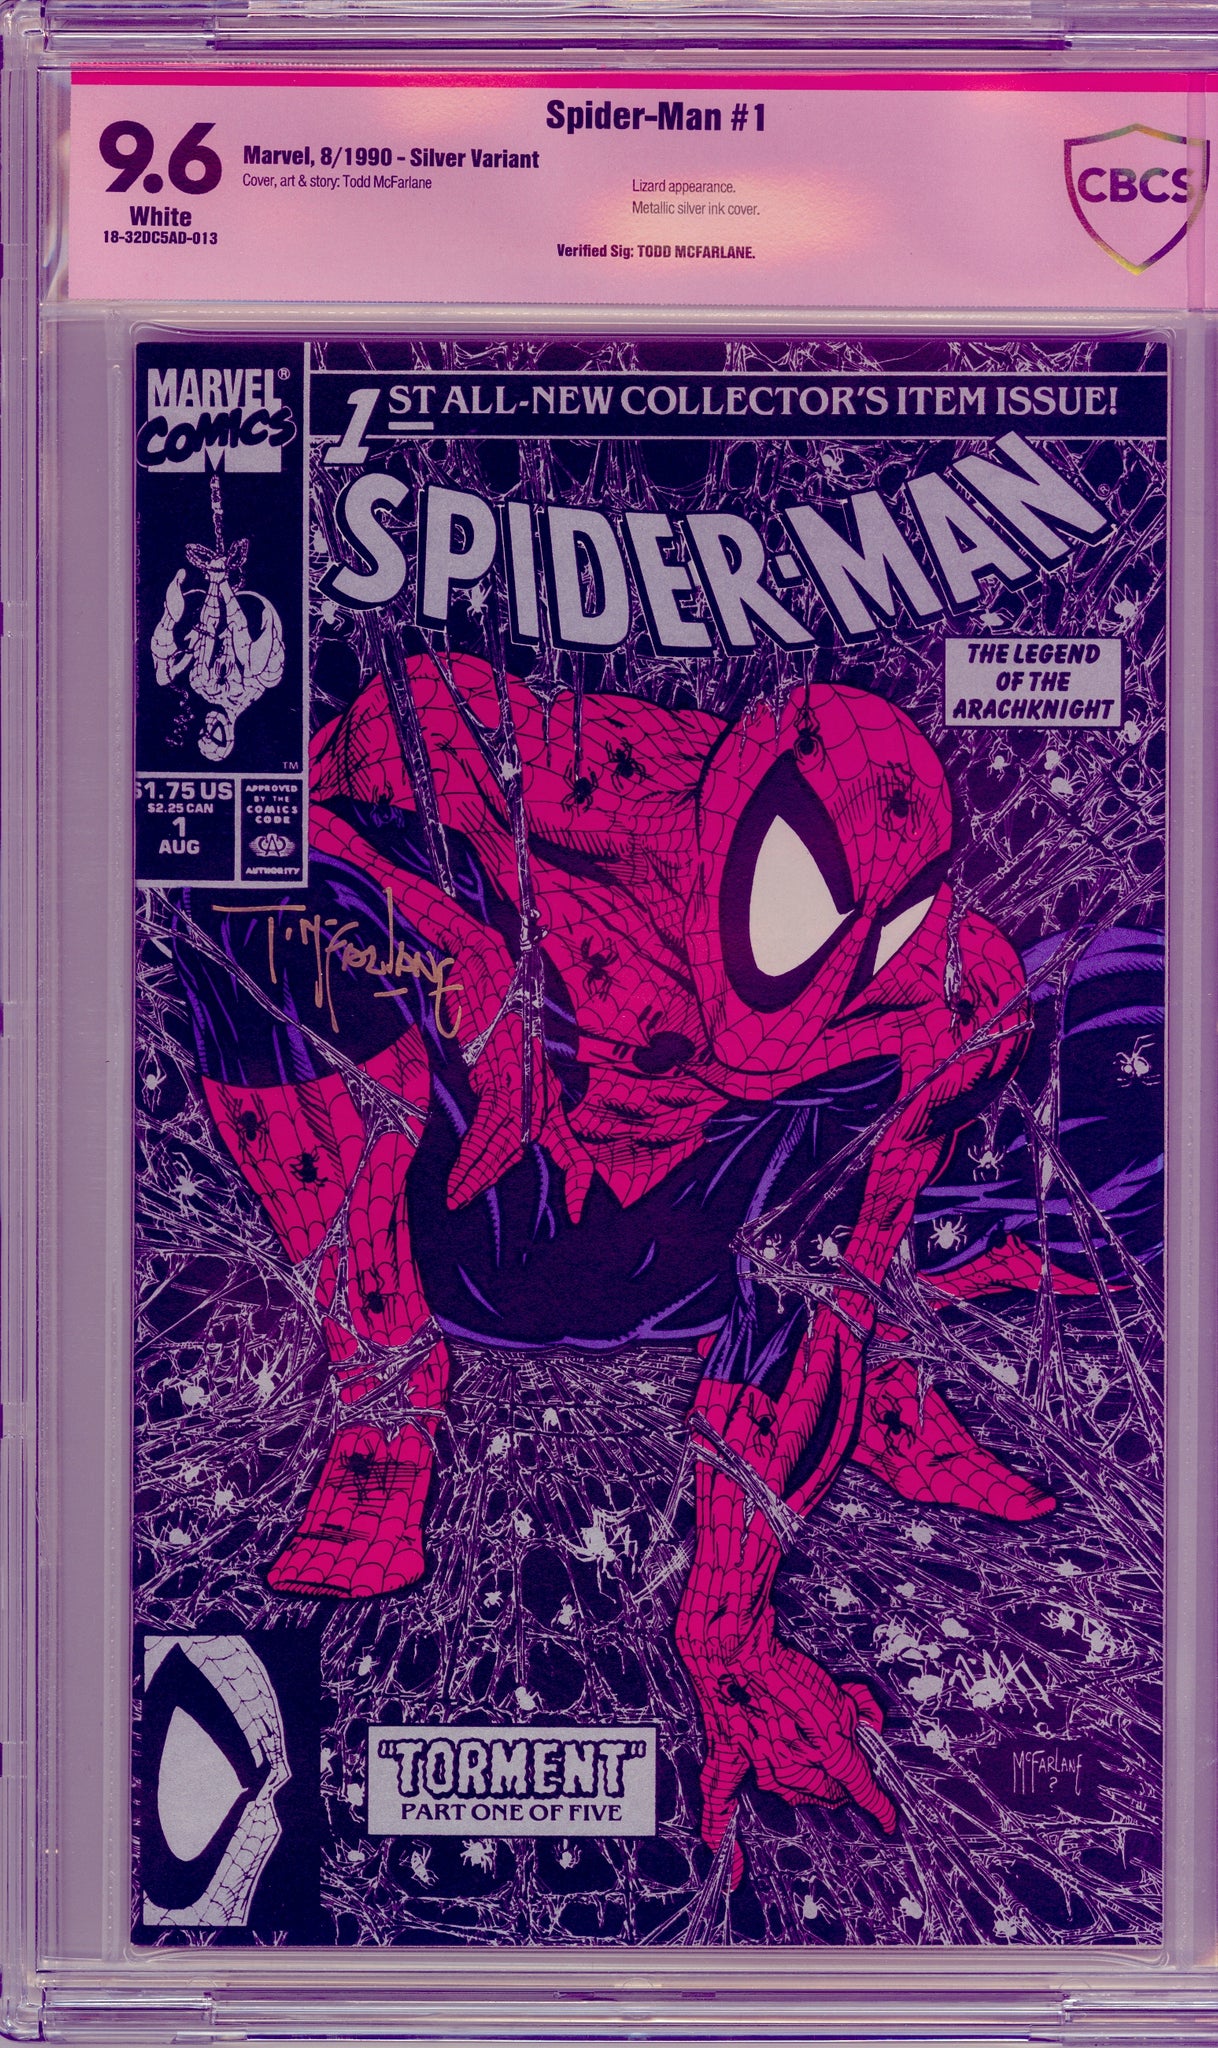 Spider-Man #1 Silver Variant Edition, Verified Signature (1990)